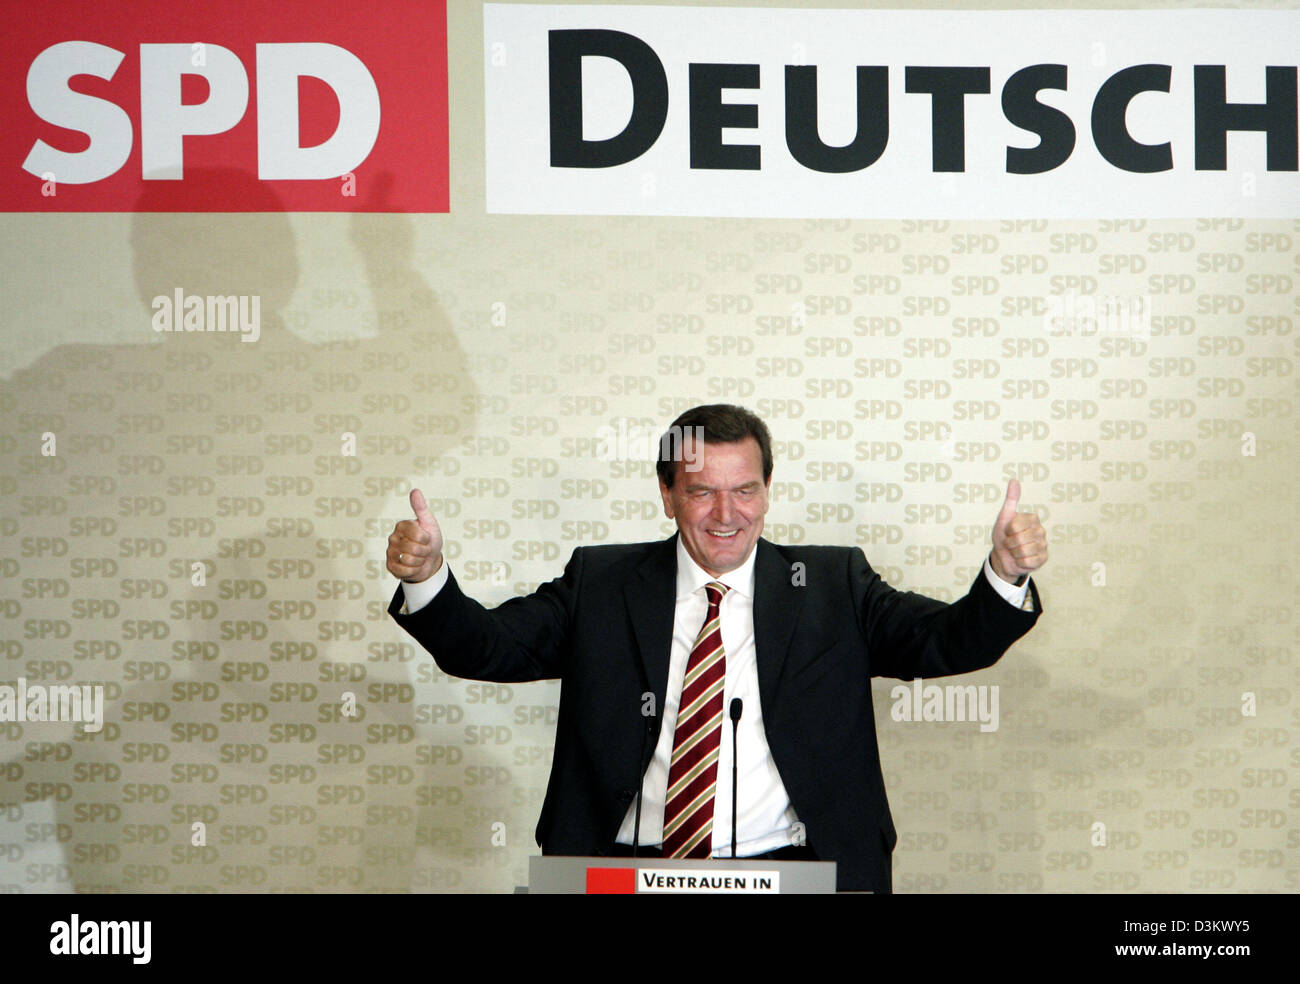 (dpa) - German Chancellor Gerhard Schroeder cheers, smiles and gives two thumbs up as he stands on stage during the election party at the SPD  headquarter in Berlin, Sunday, 18 September 2005. The conservative Union of CDU and CSU has only marginaly won the 2005 Bundestag election, according to the latest tv exit polls. There is no majority for a coalition between CDU/CSU and FDP o Stock Photo